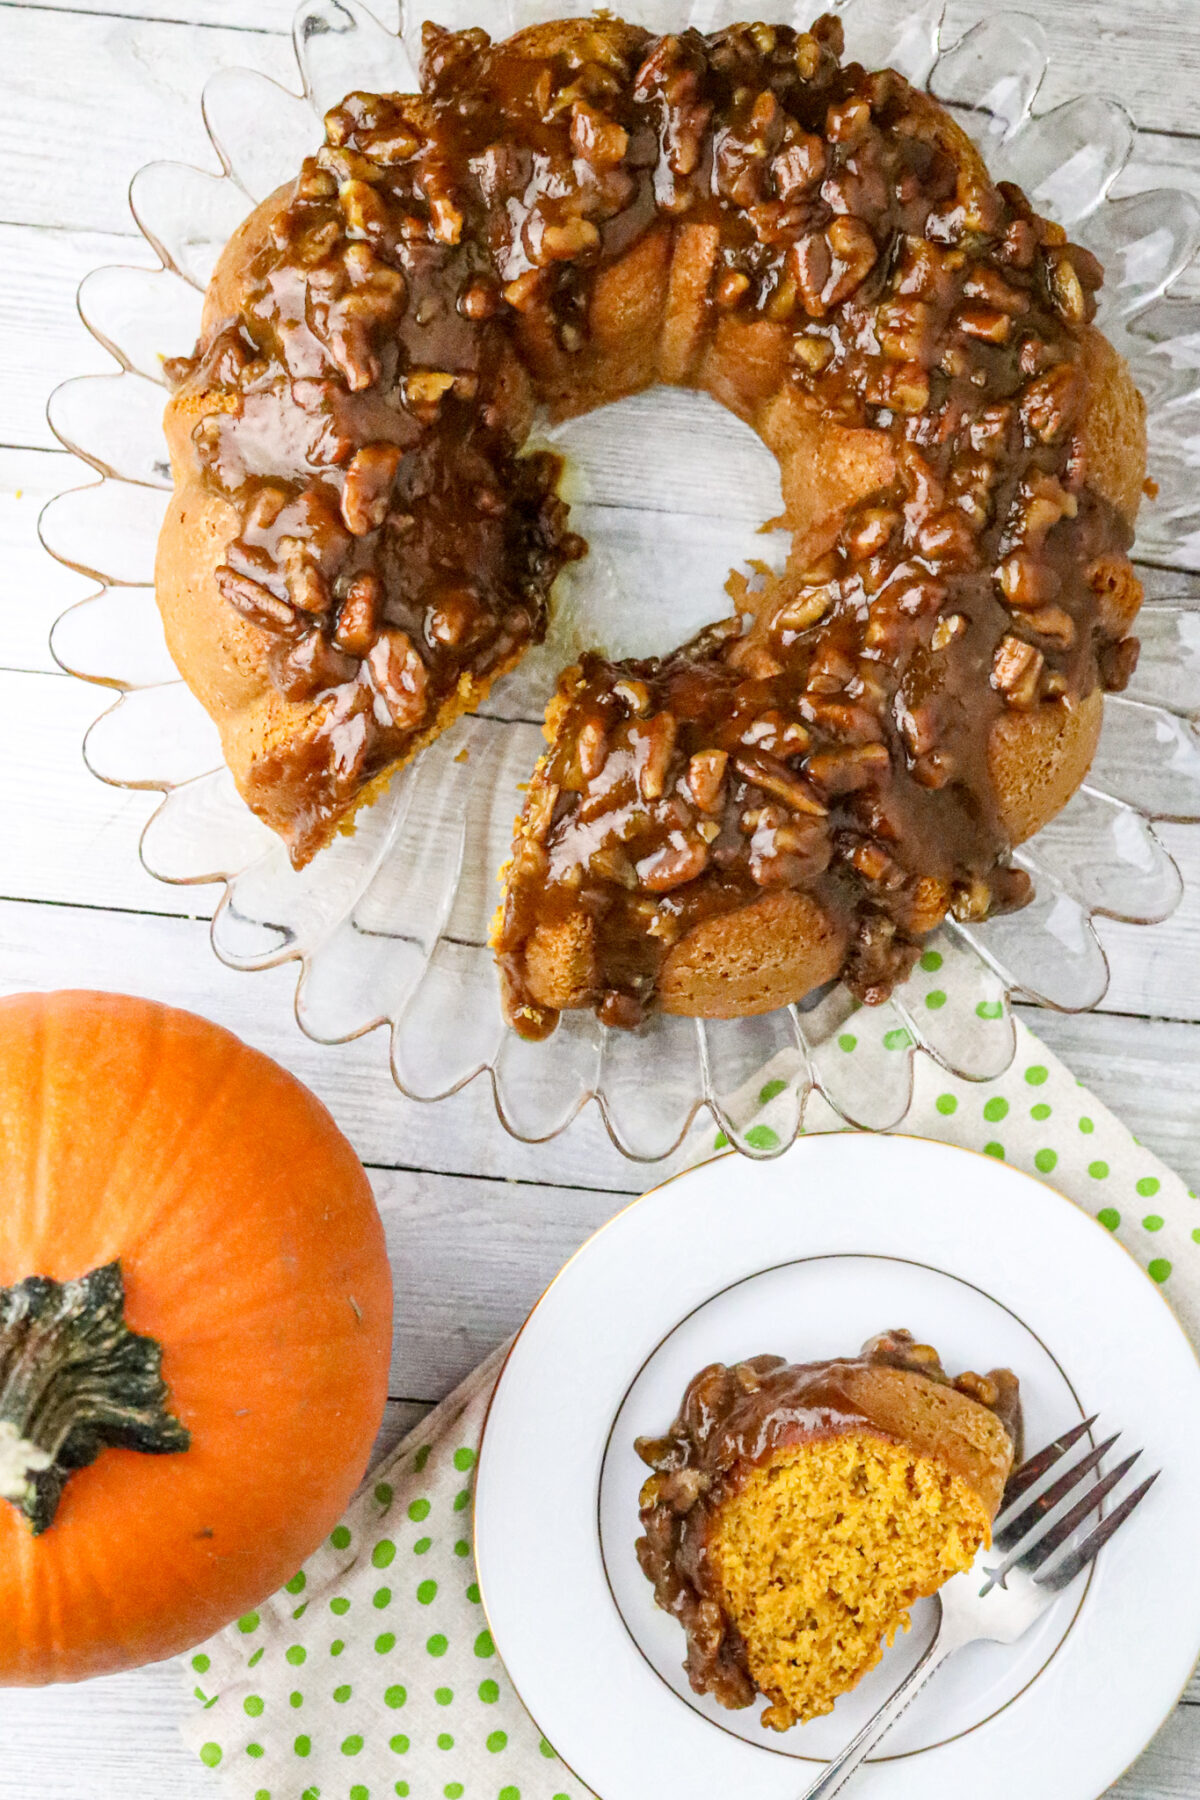 A mini pumpkin next to a slice of 2-Ingredient Pumpkin Cake With Brown Sugar Glaze on a plate with a fork.